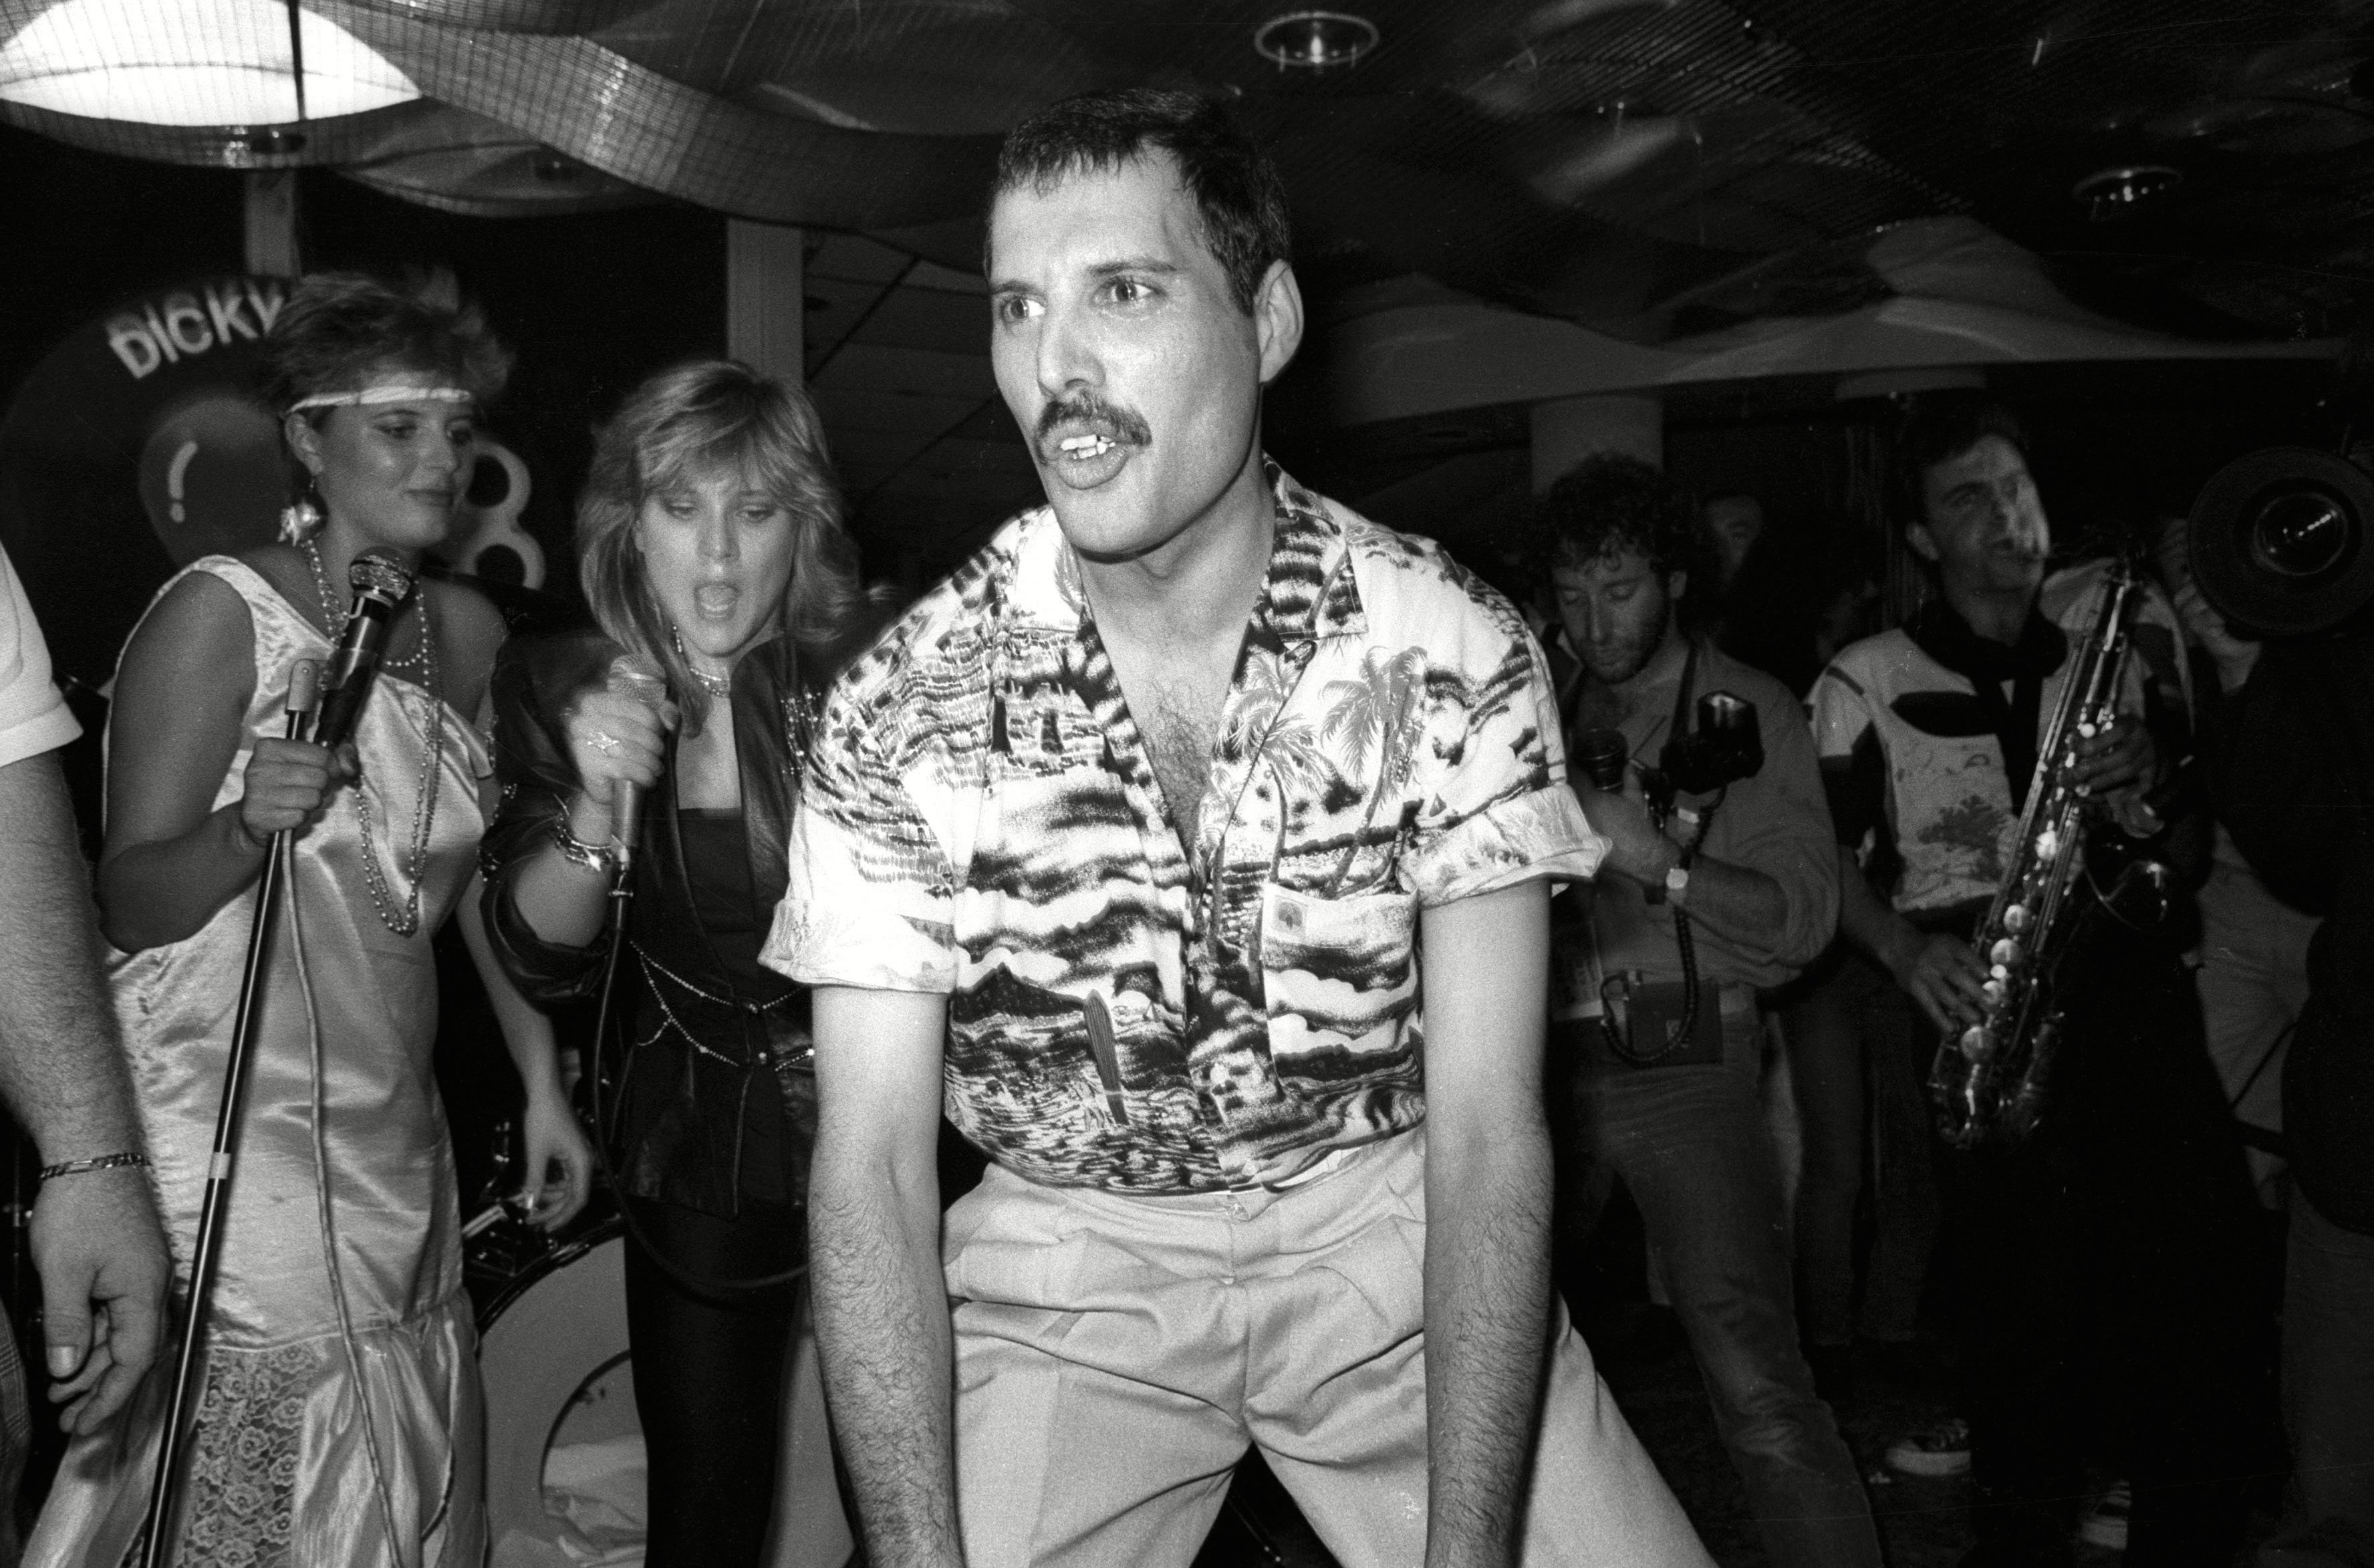 Sam Fox in the Background Queen Hold A Private Concert and Party and Were Billed As 'Dicky Heart and the Pacemakers' at the Kensington Roof Gardens - 11 Jul 1986